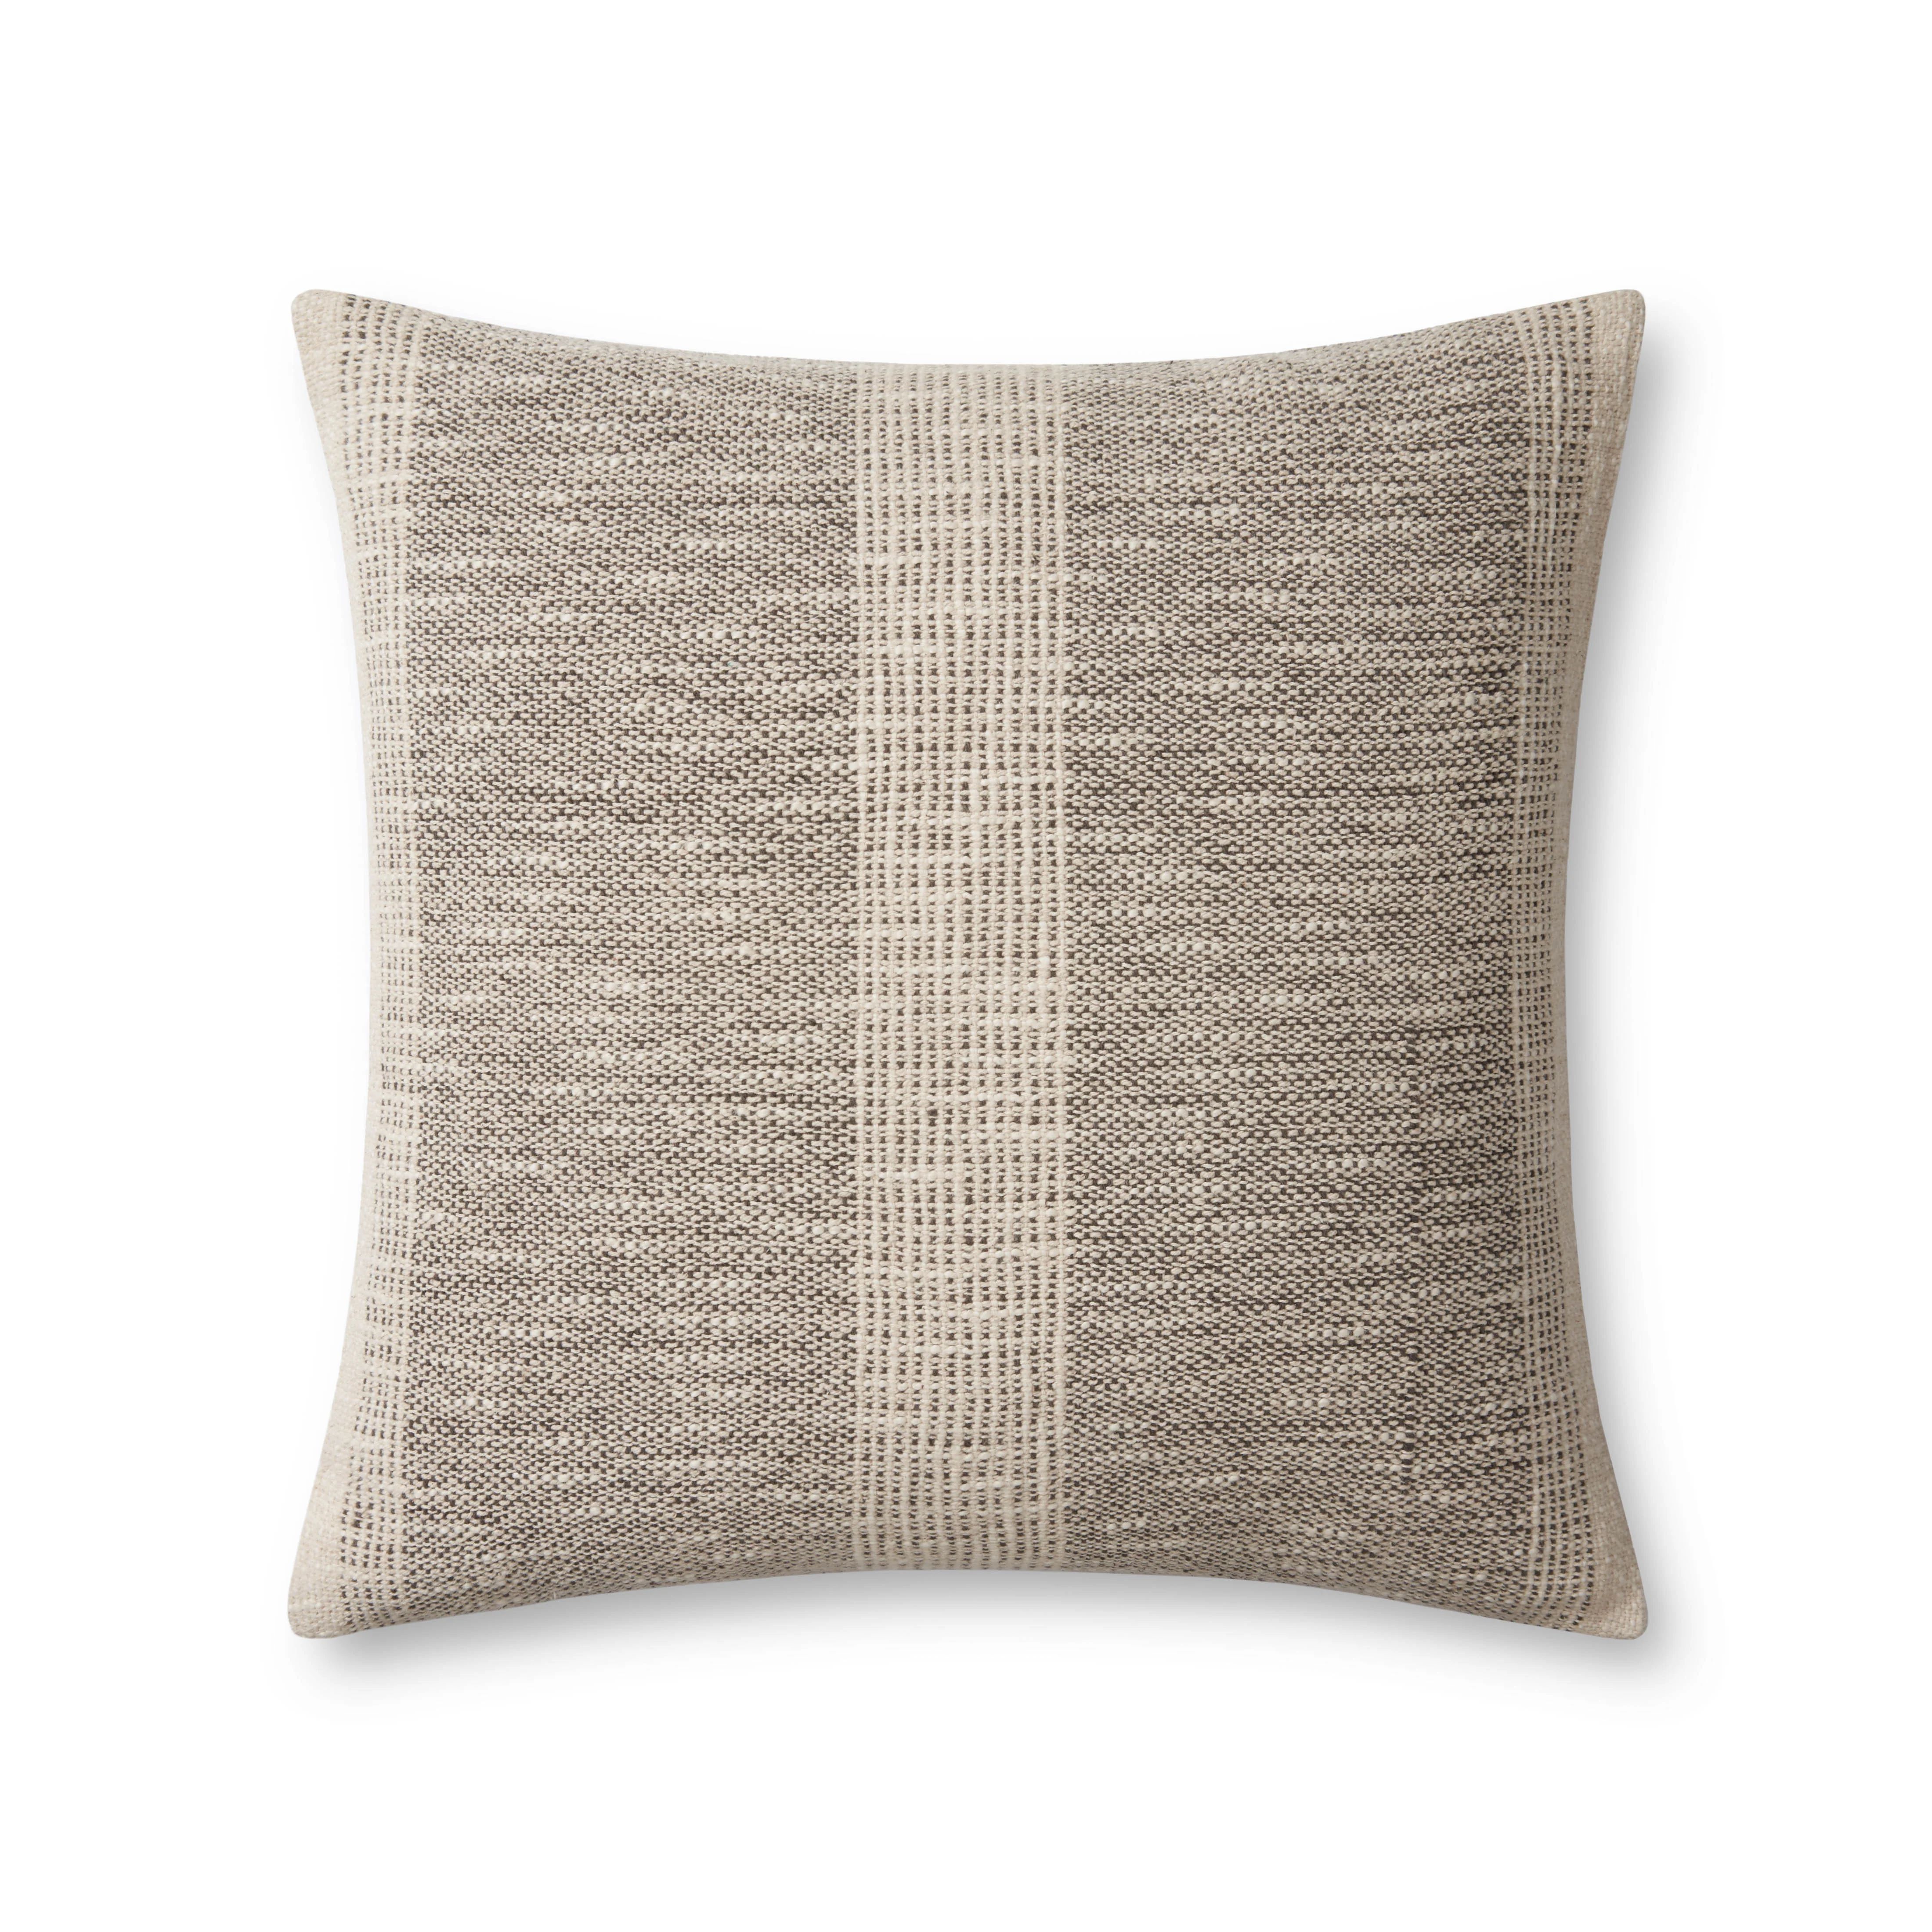 Angela Rose x Loloi Dusk Charcoal / Ivory Pillow | Eco Chic Home